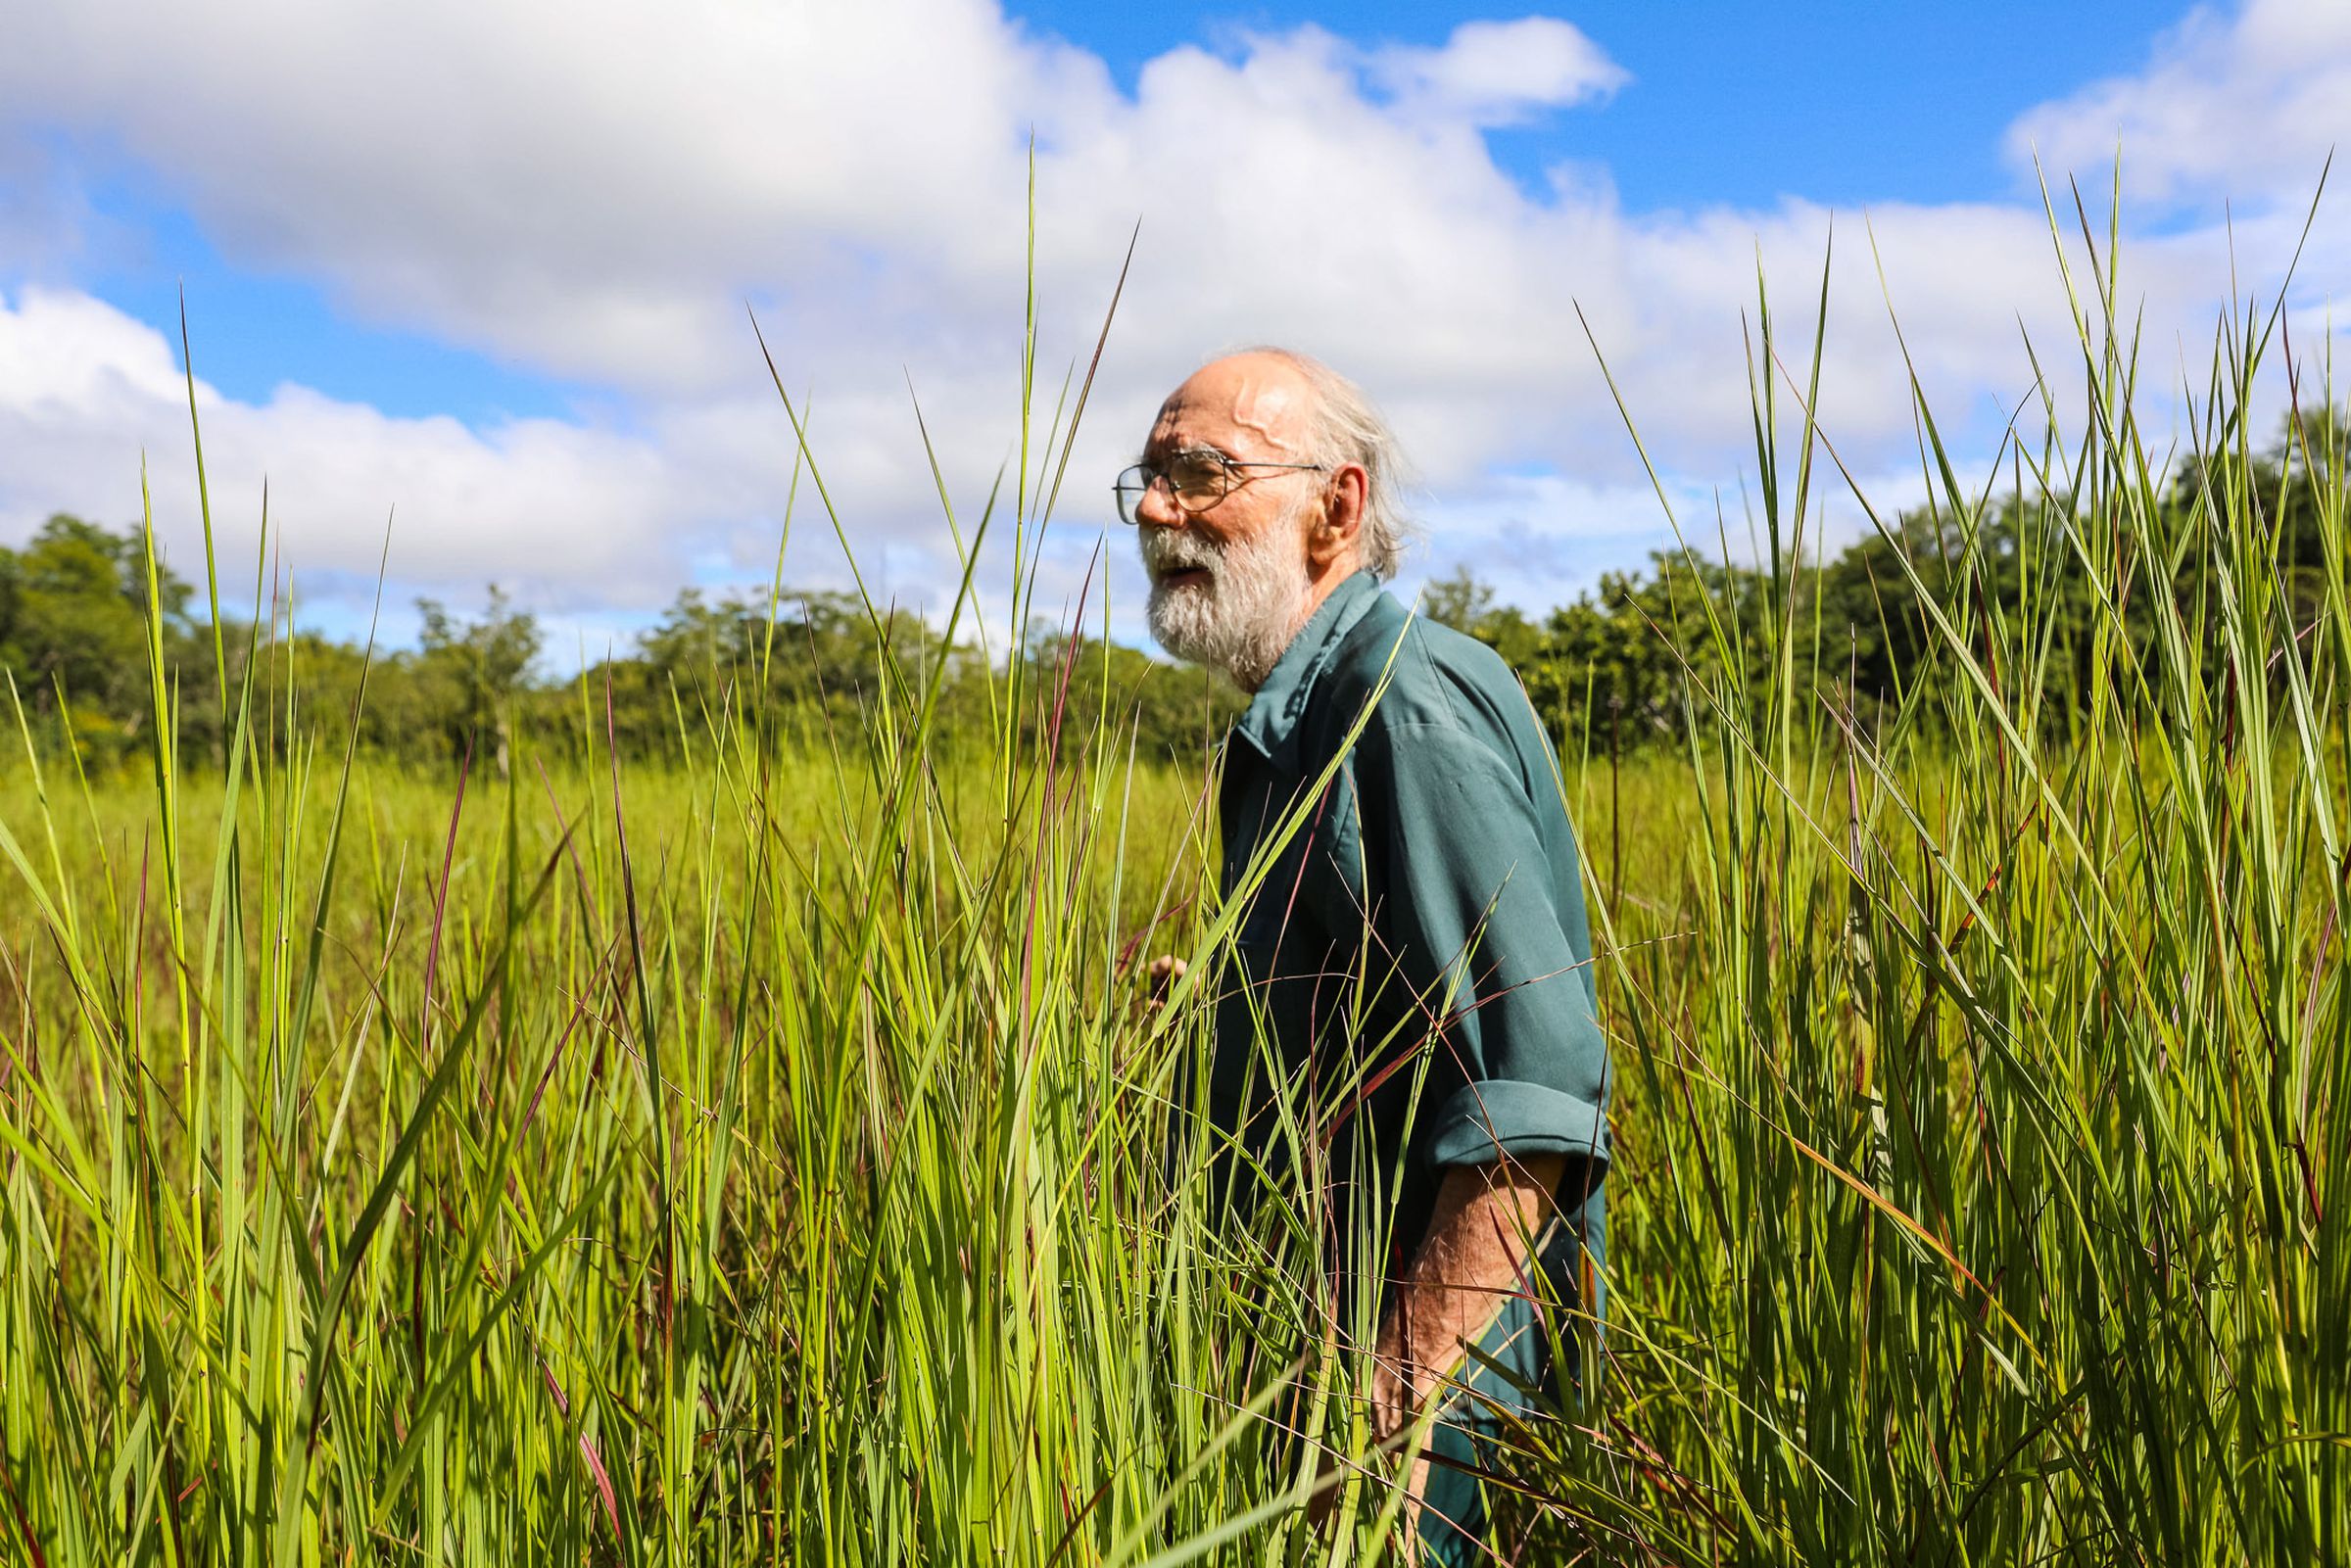 An older man wearing glasses stands amid grass that is nearly as tall as he is.